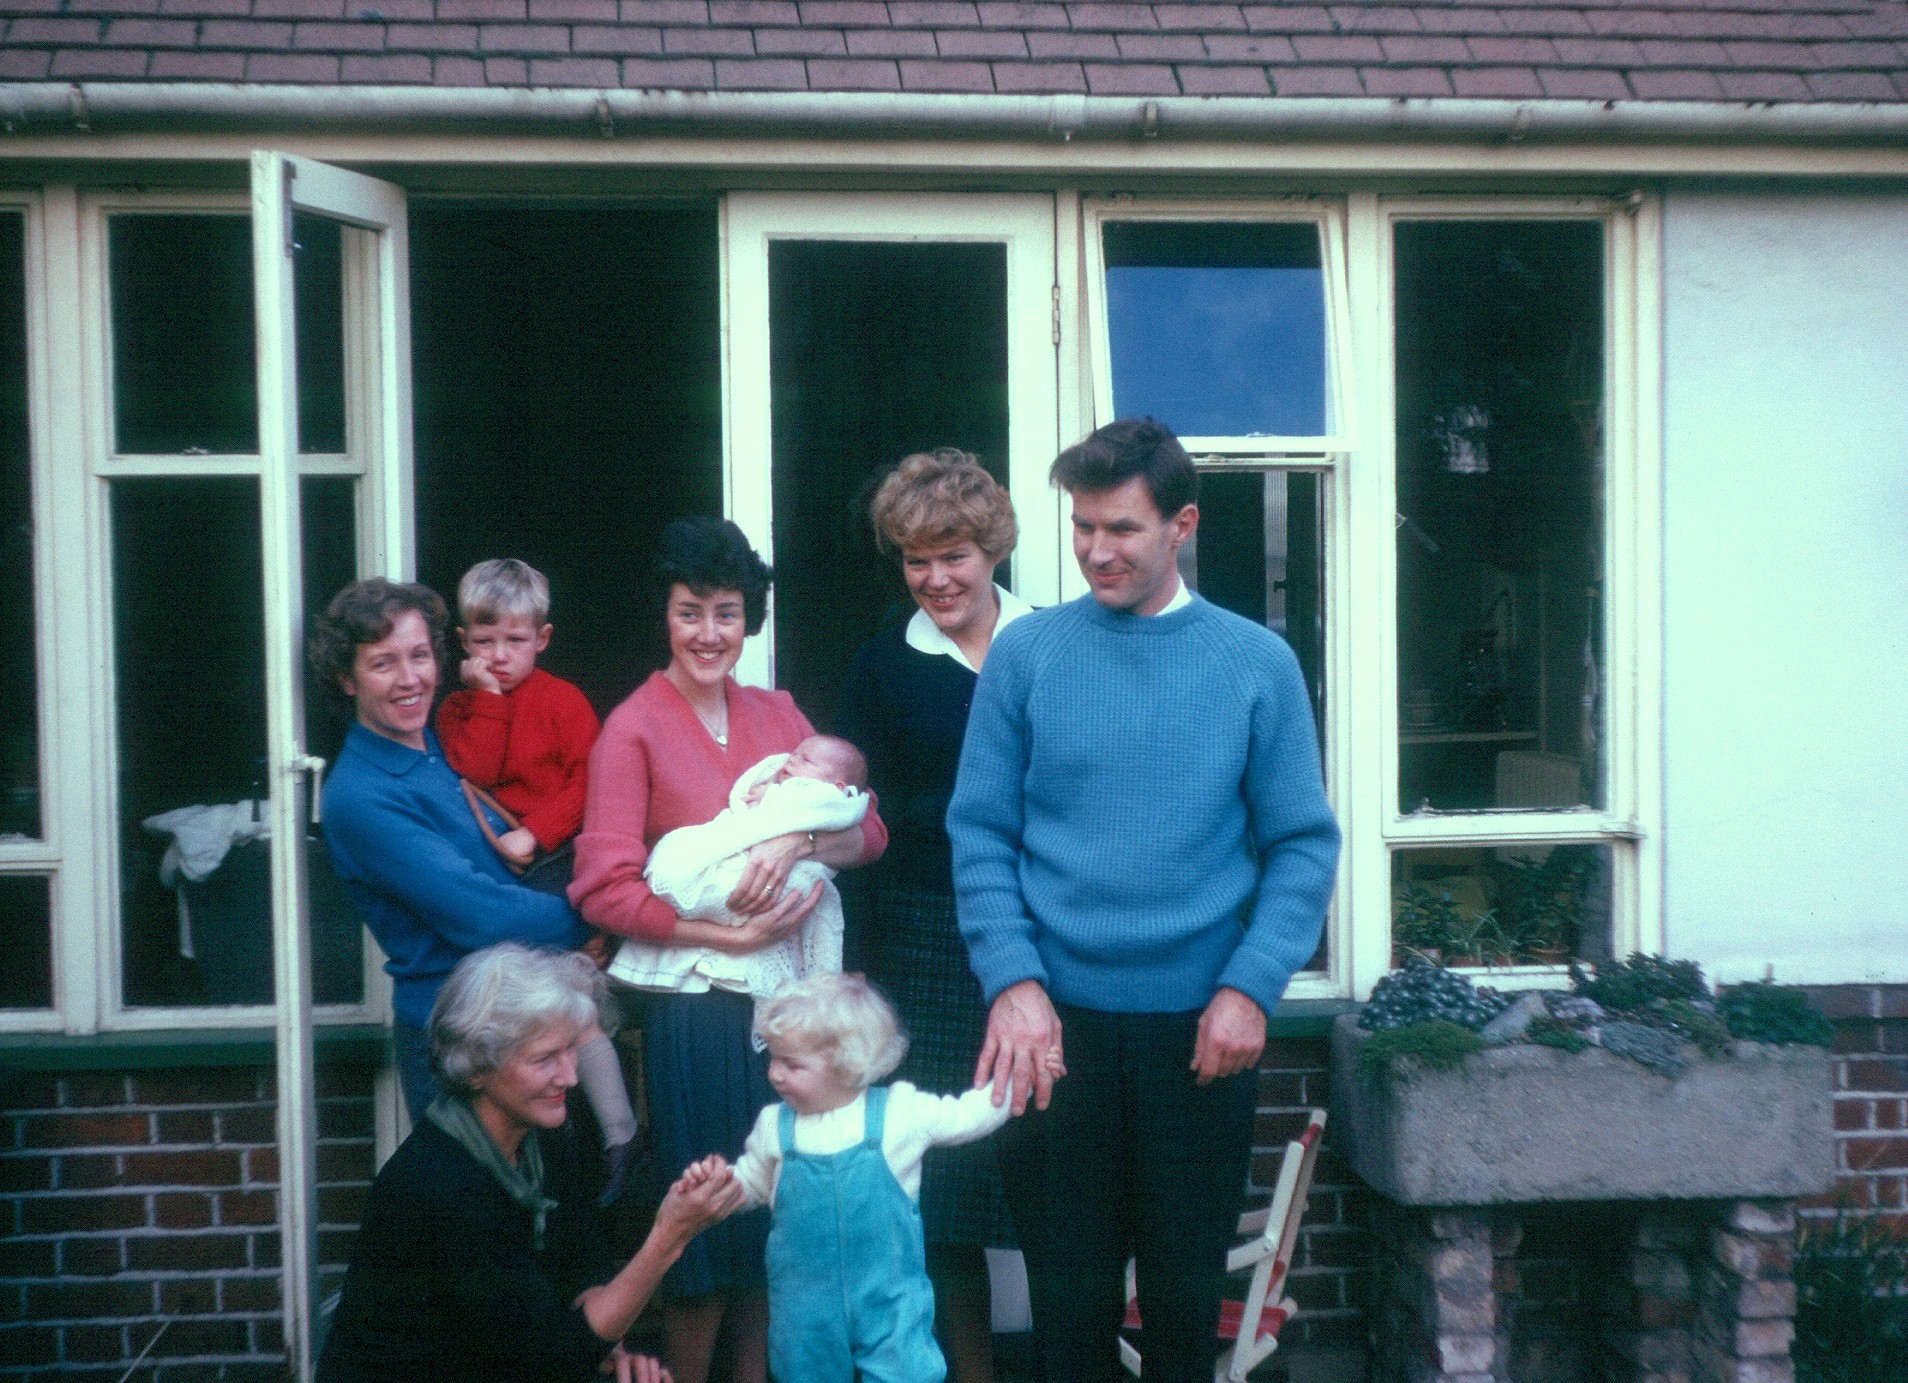 6300726s 10 November 1963 - Jean with Pater, Betty with Simon, Frances and Anthony with Mum and Nocola in the front.